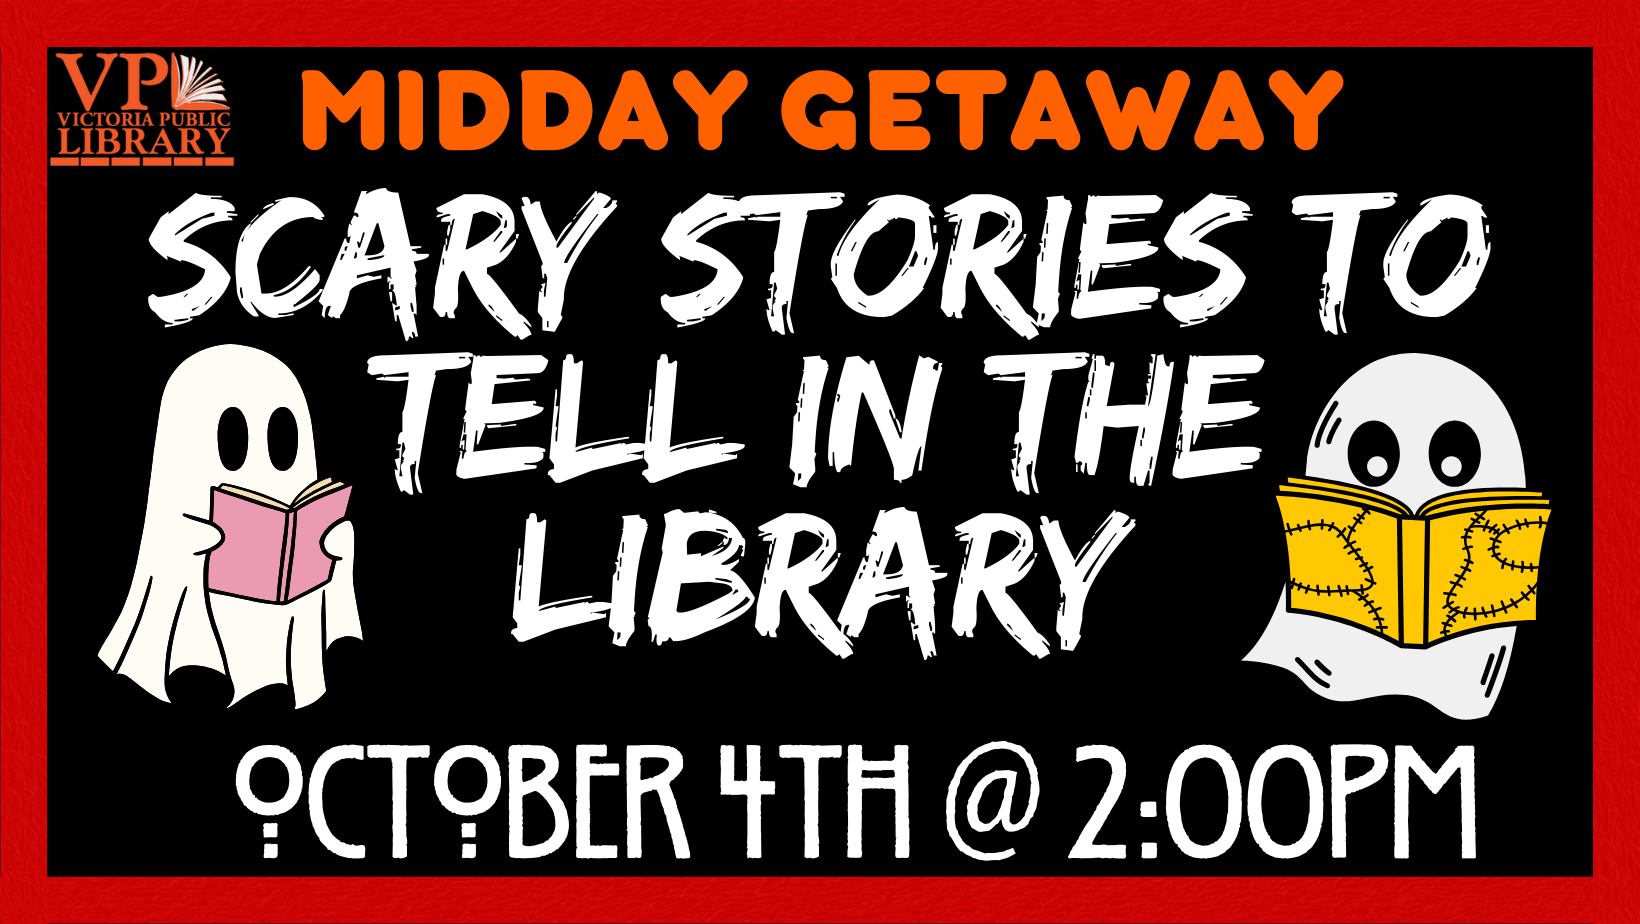 Do you enjoy all things spooky? How about listening to spine-tingling tales? If so, join us to create spooky storytelling relays and meet new friends.